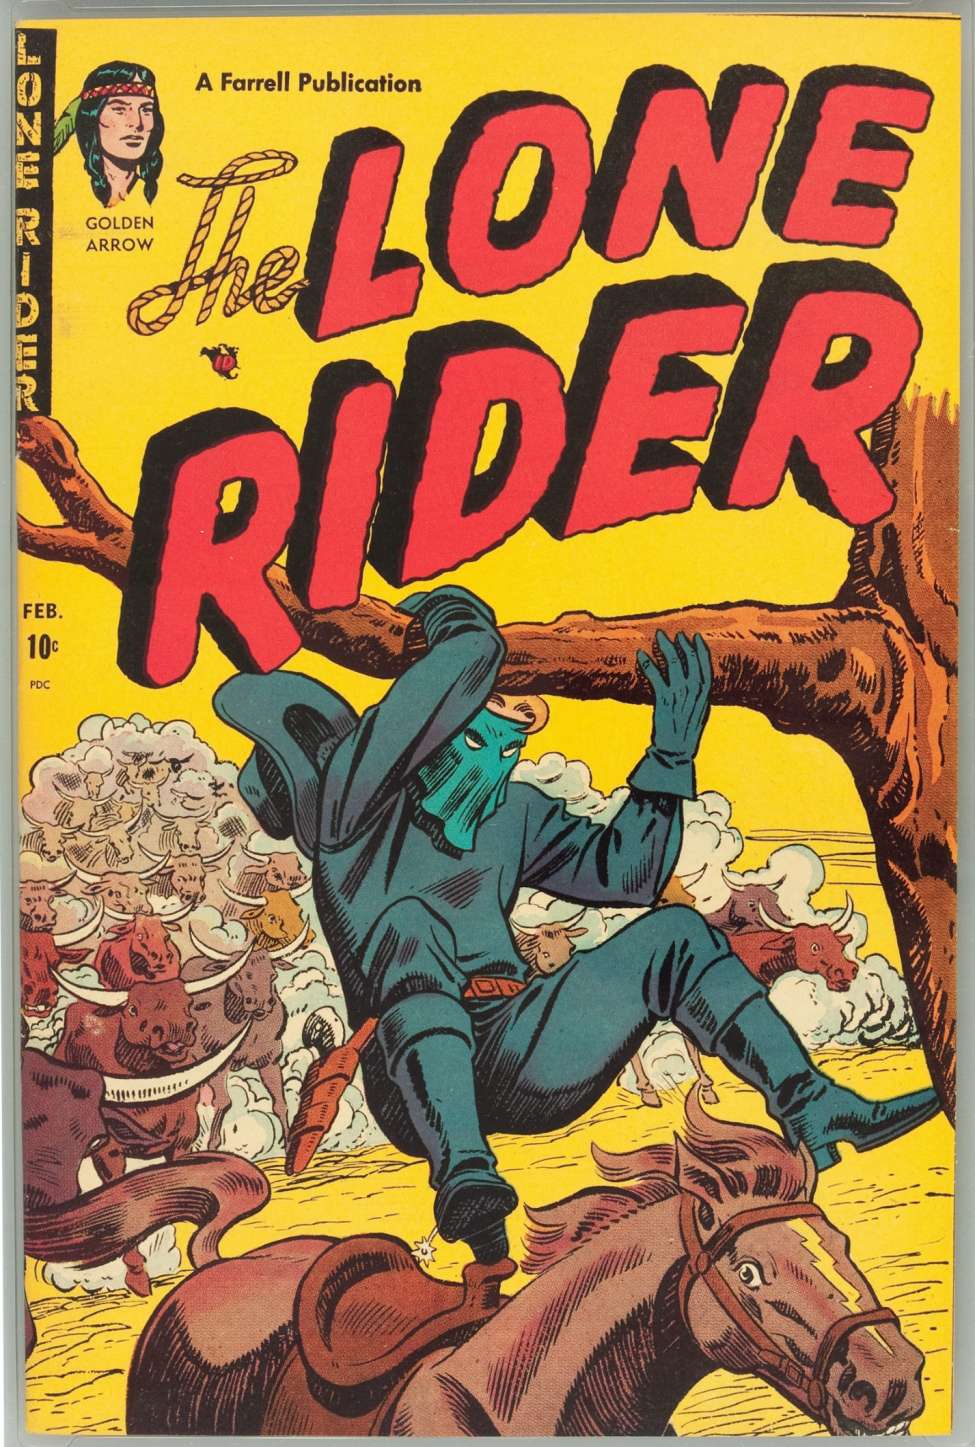 Book Cover For The Lone Rider 6 - Version 2